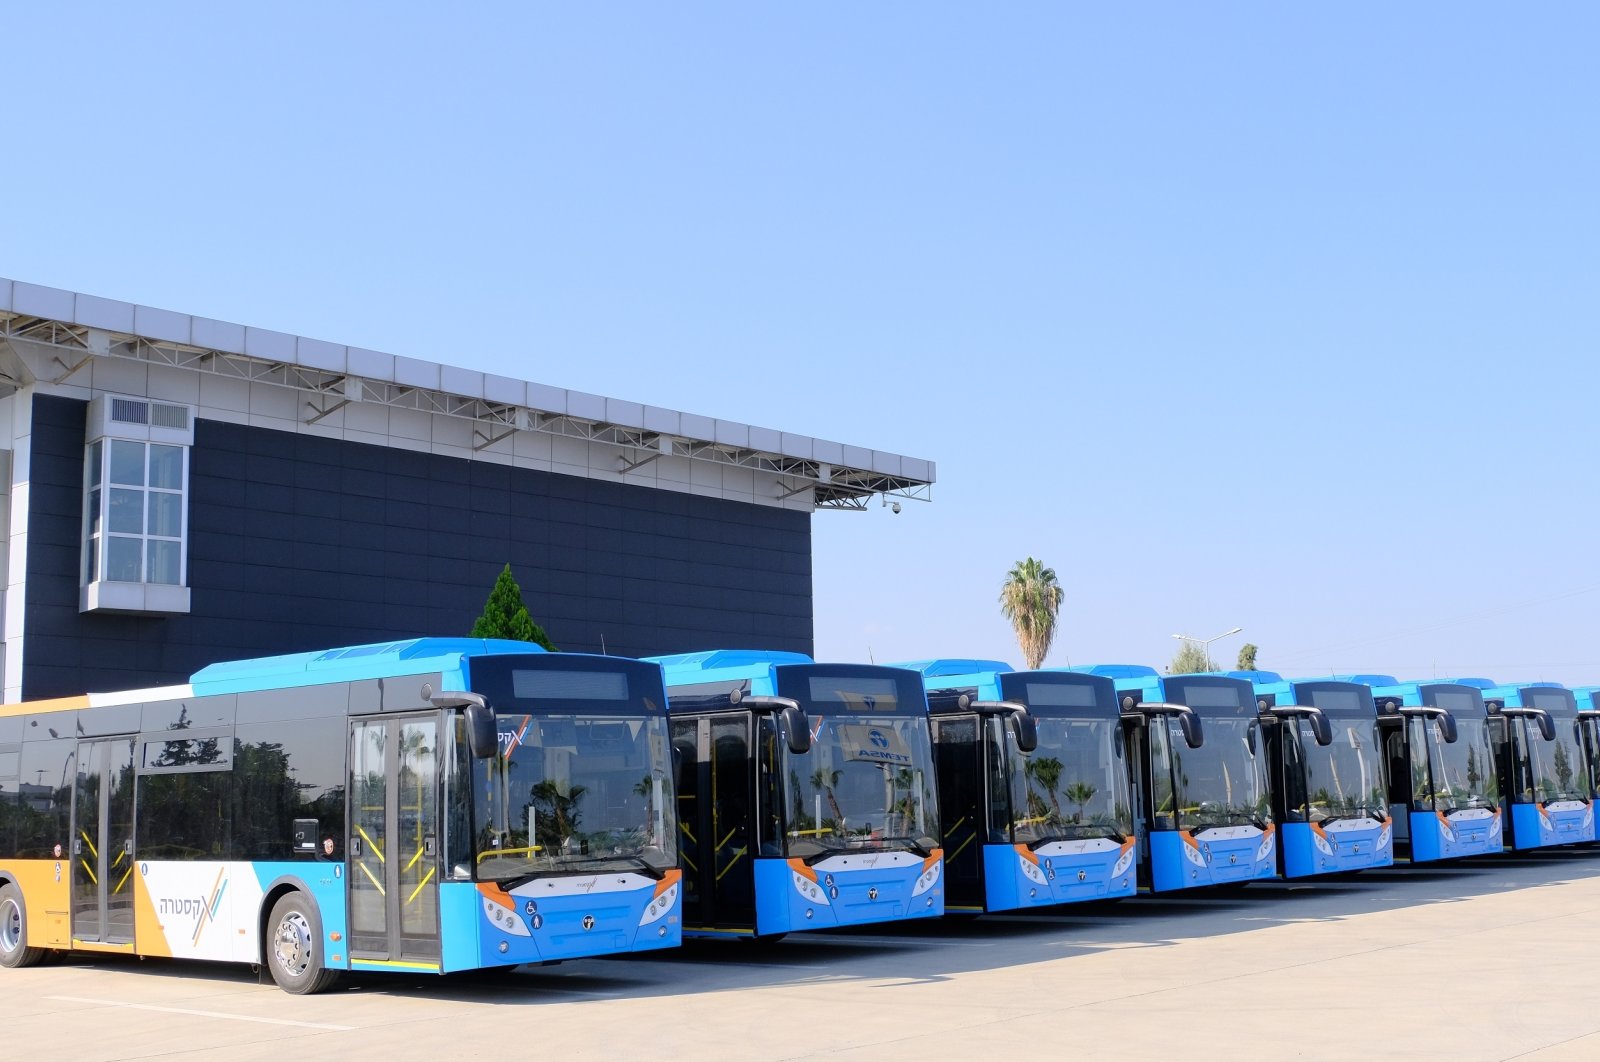 TEMSA, a major Turkish bus manufacturer, recently delivered 48 environmentally friendly buses to Dalhom Motors, one of the largest operators in Israel. (TEMSA – Anadolu Agency)